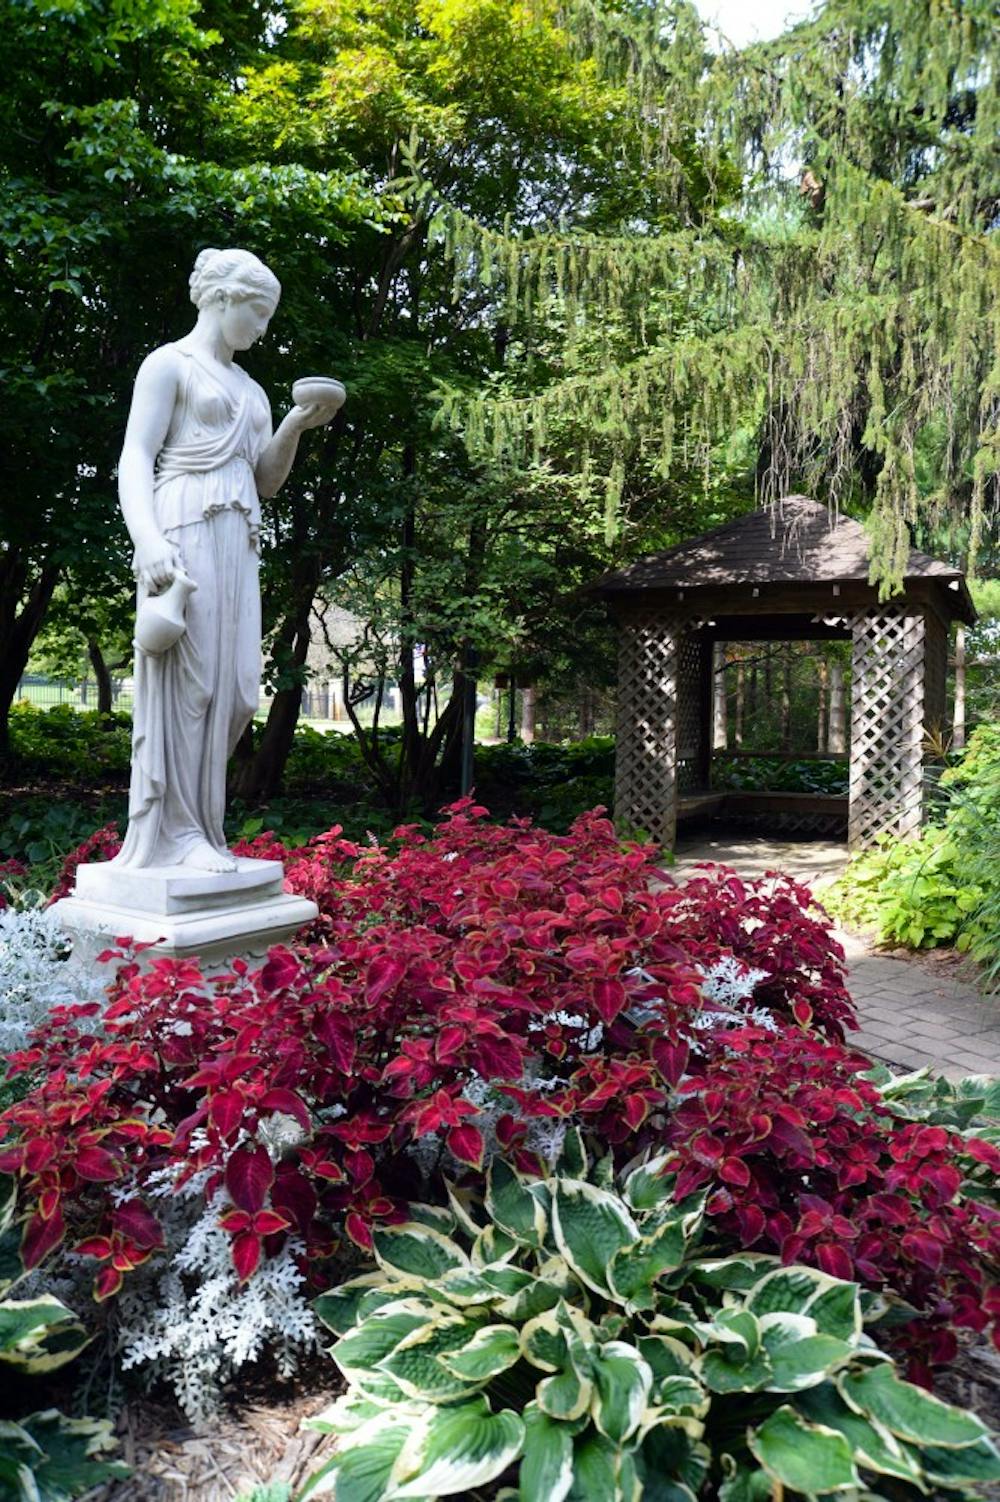 <p>Krider Garden is one of the earliest botanical parks in Indiana.&nbsp;Ball State students and Krider Garden collaborated to create a mobile tour of the garden, available at on the garden’s <a href="http://kridergarden.com/">website</a>.&nbsp;Adina Stuhlman // Photo Provided</p>